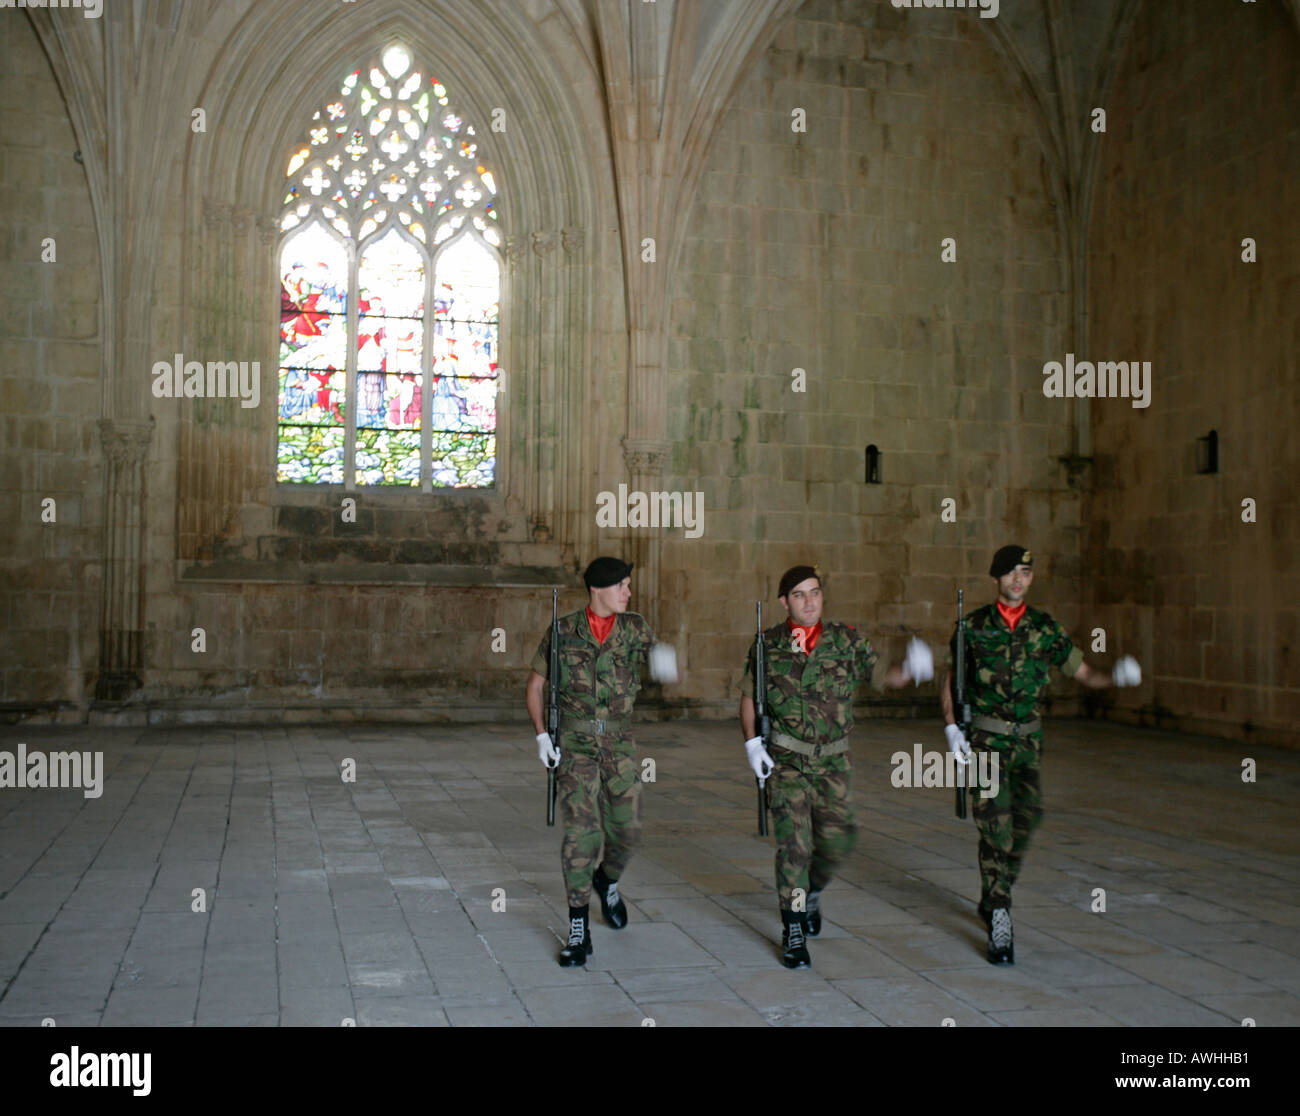 An honor guard of soldiers march in the tomb of the unknown soldier at the ornate monastery at Batalha Portugal. Stock Photo